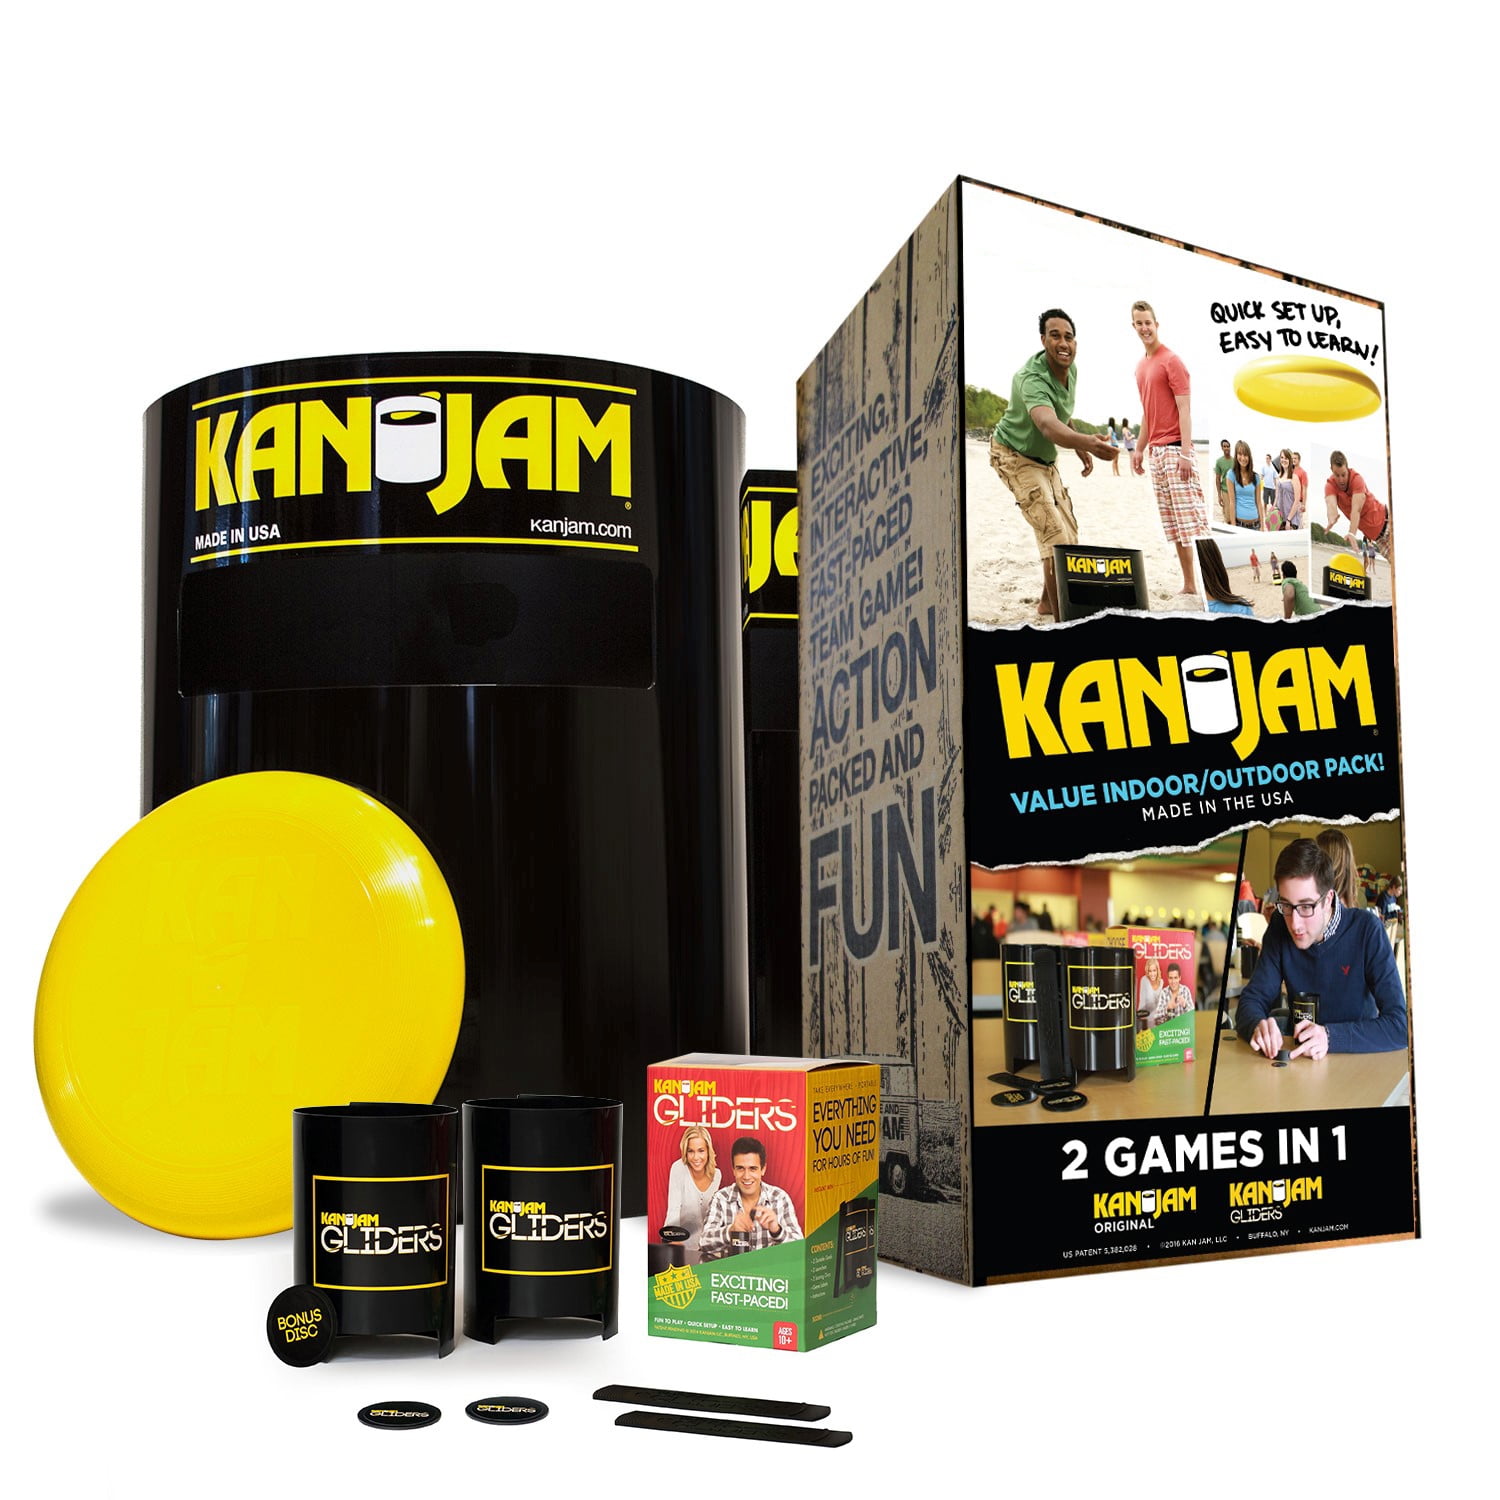 Can Kan Jam Outdoor Ultimate Disc Game Family Portable Fun Event Sports Good 